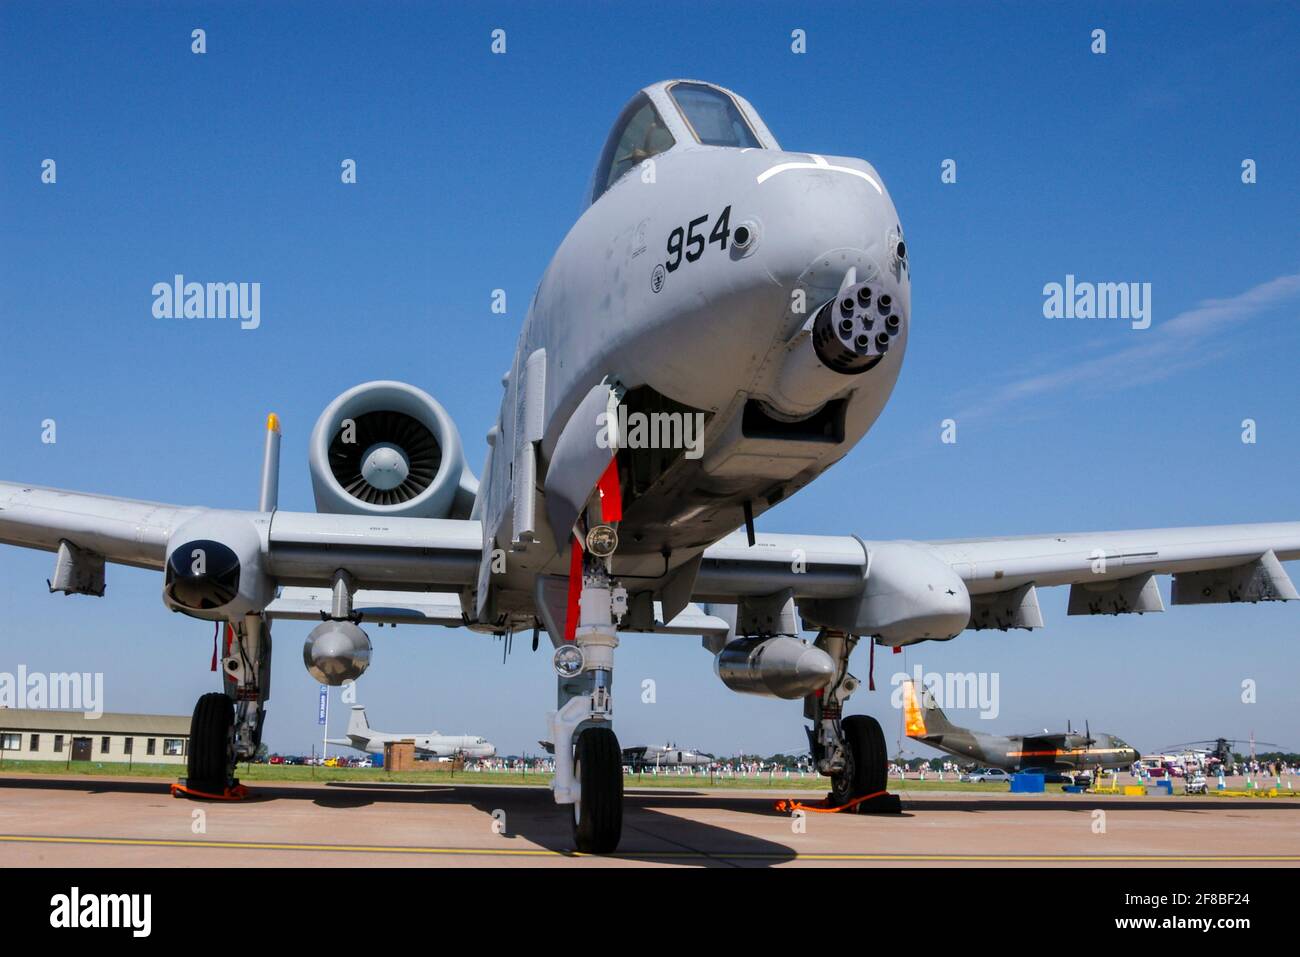 Fairchild Republic A-10 Thunderbolt II, American twin-engine straight wing jet aircraft developed for tank busting ground attack with huge Gatling gun Stock Photo